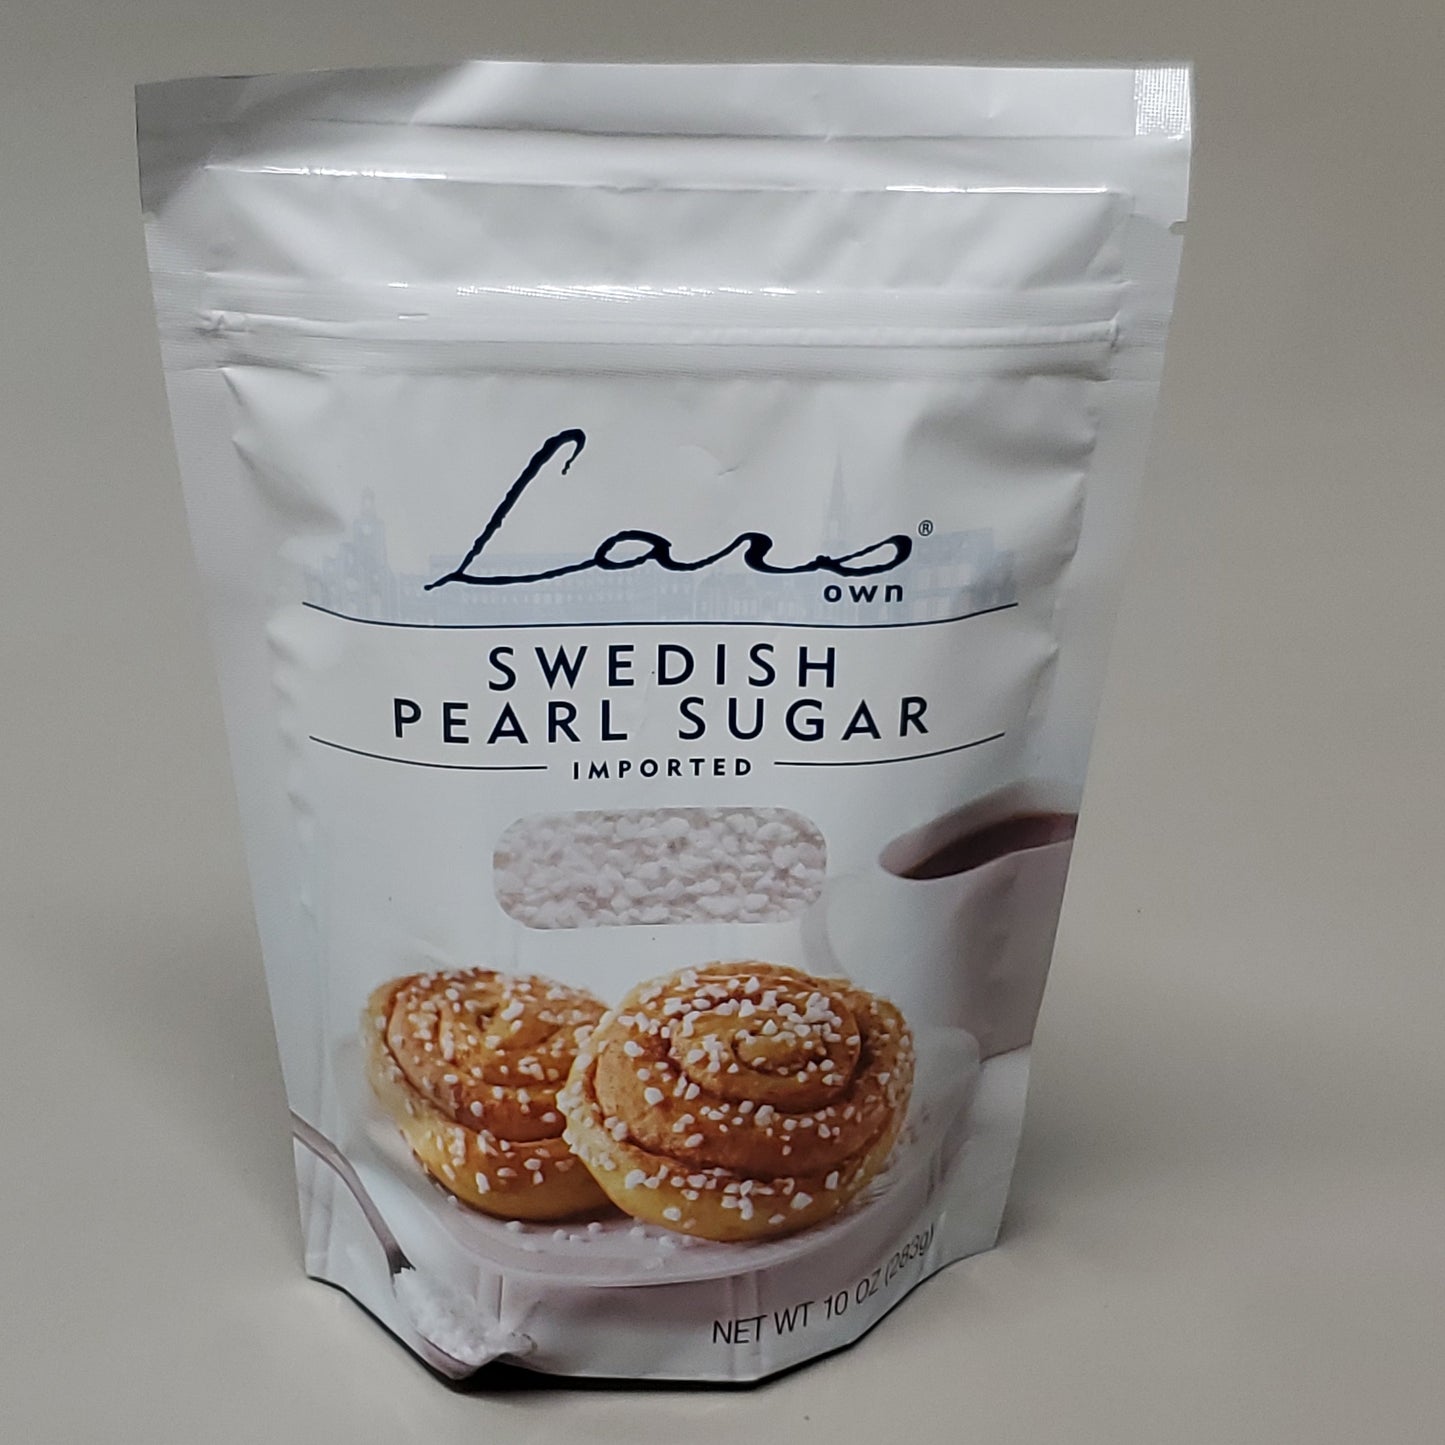 ZA@ 6-PACK! LARS OWN Swedish Pearl Sugar (Imported) 10 oz Best By 02/24 (New)